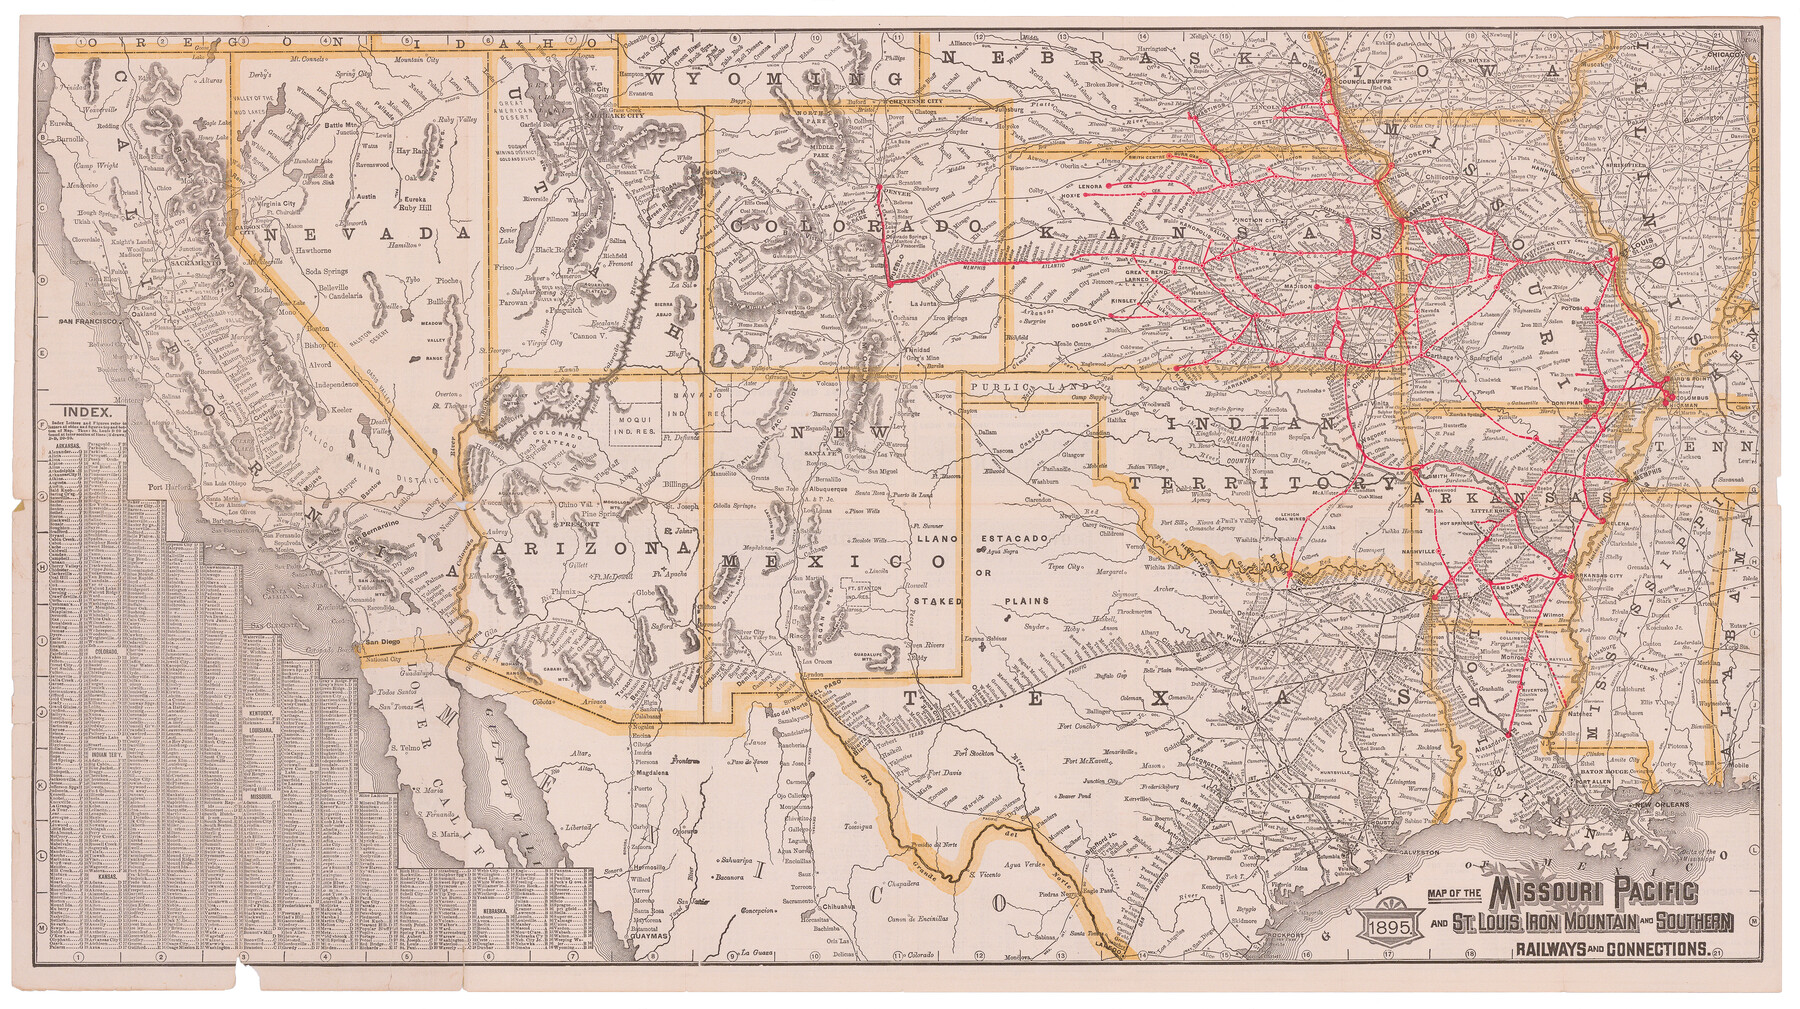 95790, Map of the Missouri Pacific and St. Louis, Iron Mountain and Southern Railways and Connections, Cobb Digital Map Collection - 1